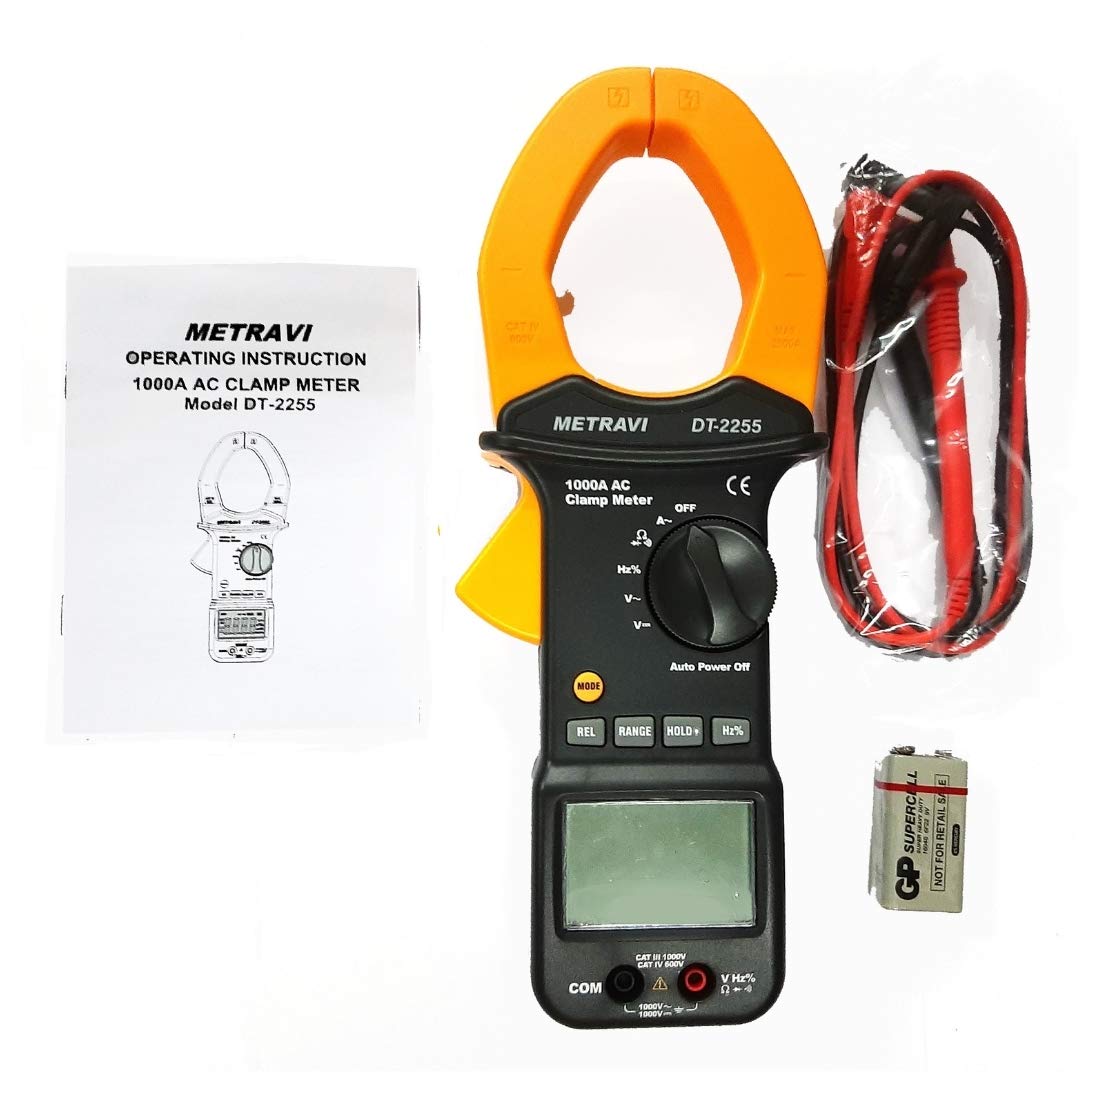 Metravi DT-2255 Big Jaw AC Clamp Meter 1000A, Fully Protected, Auto-ranging